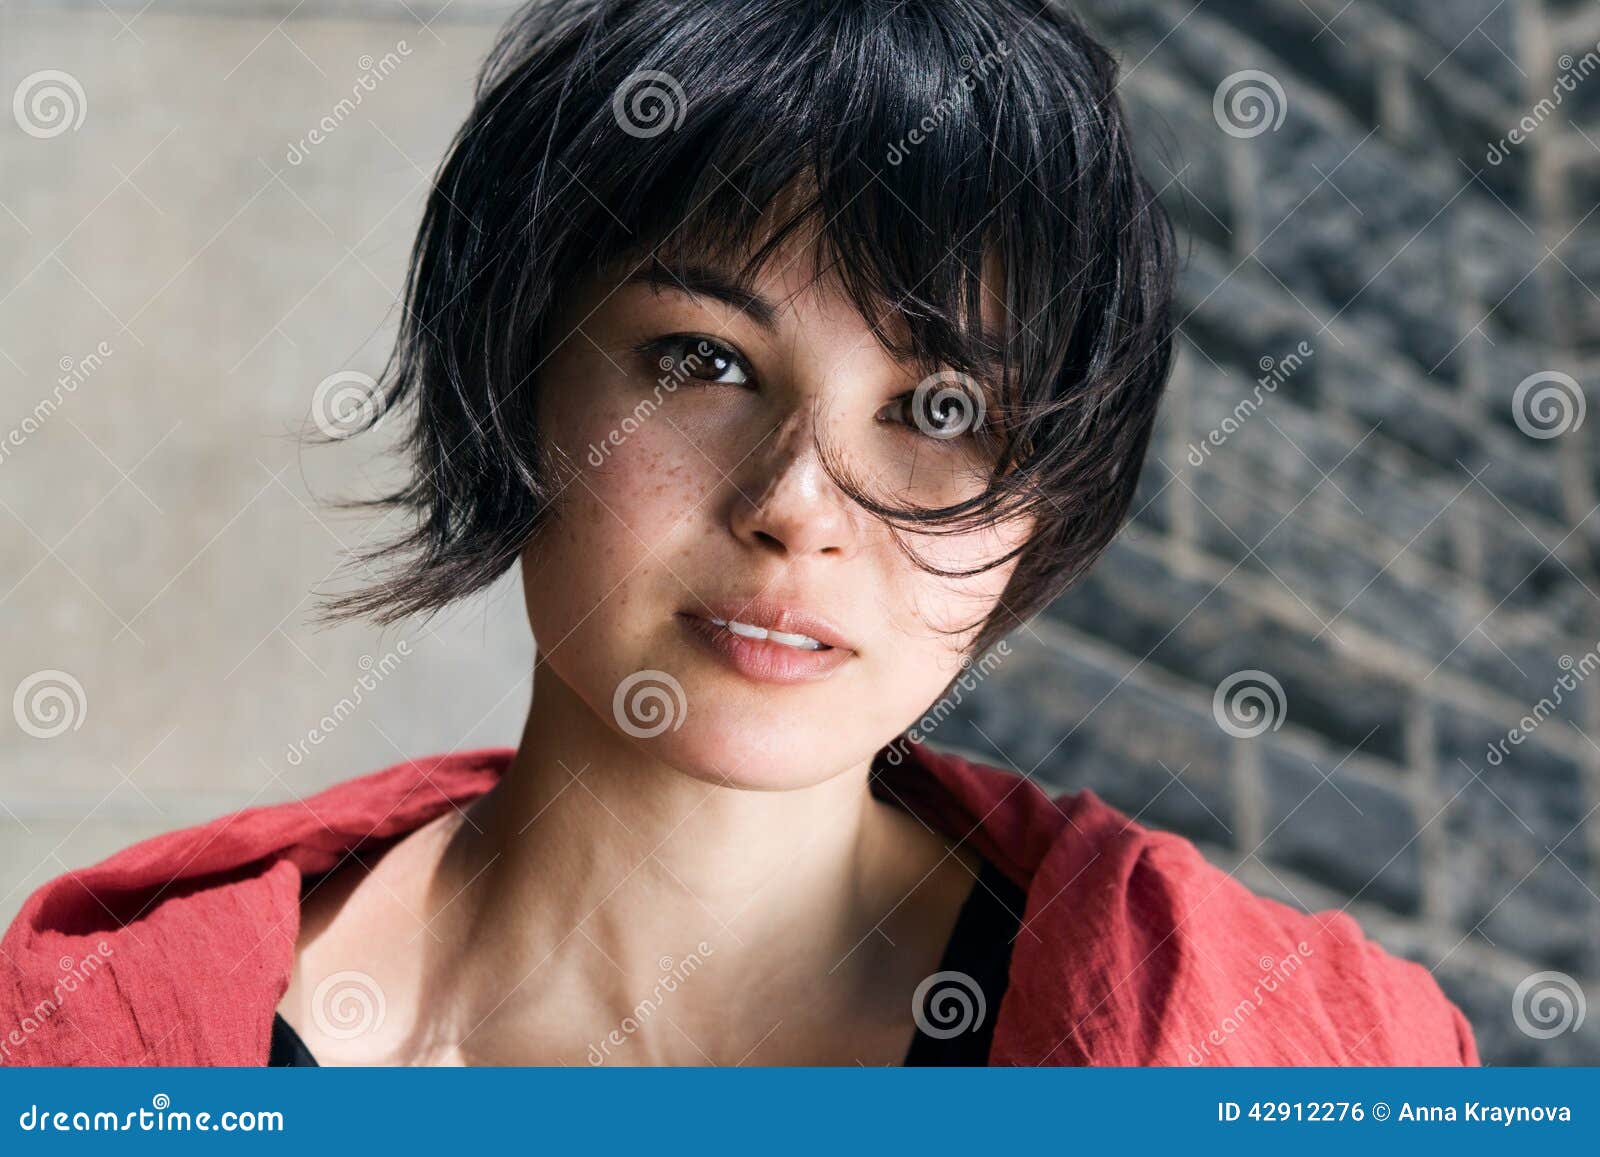 Japanese Girl with Short Hair with Freckles Stock Photo - Image of lips,  look: 42912276